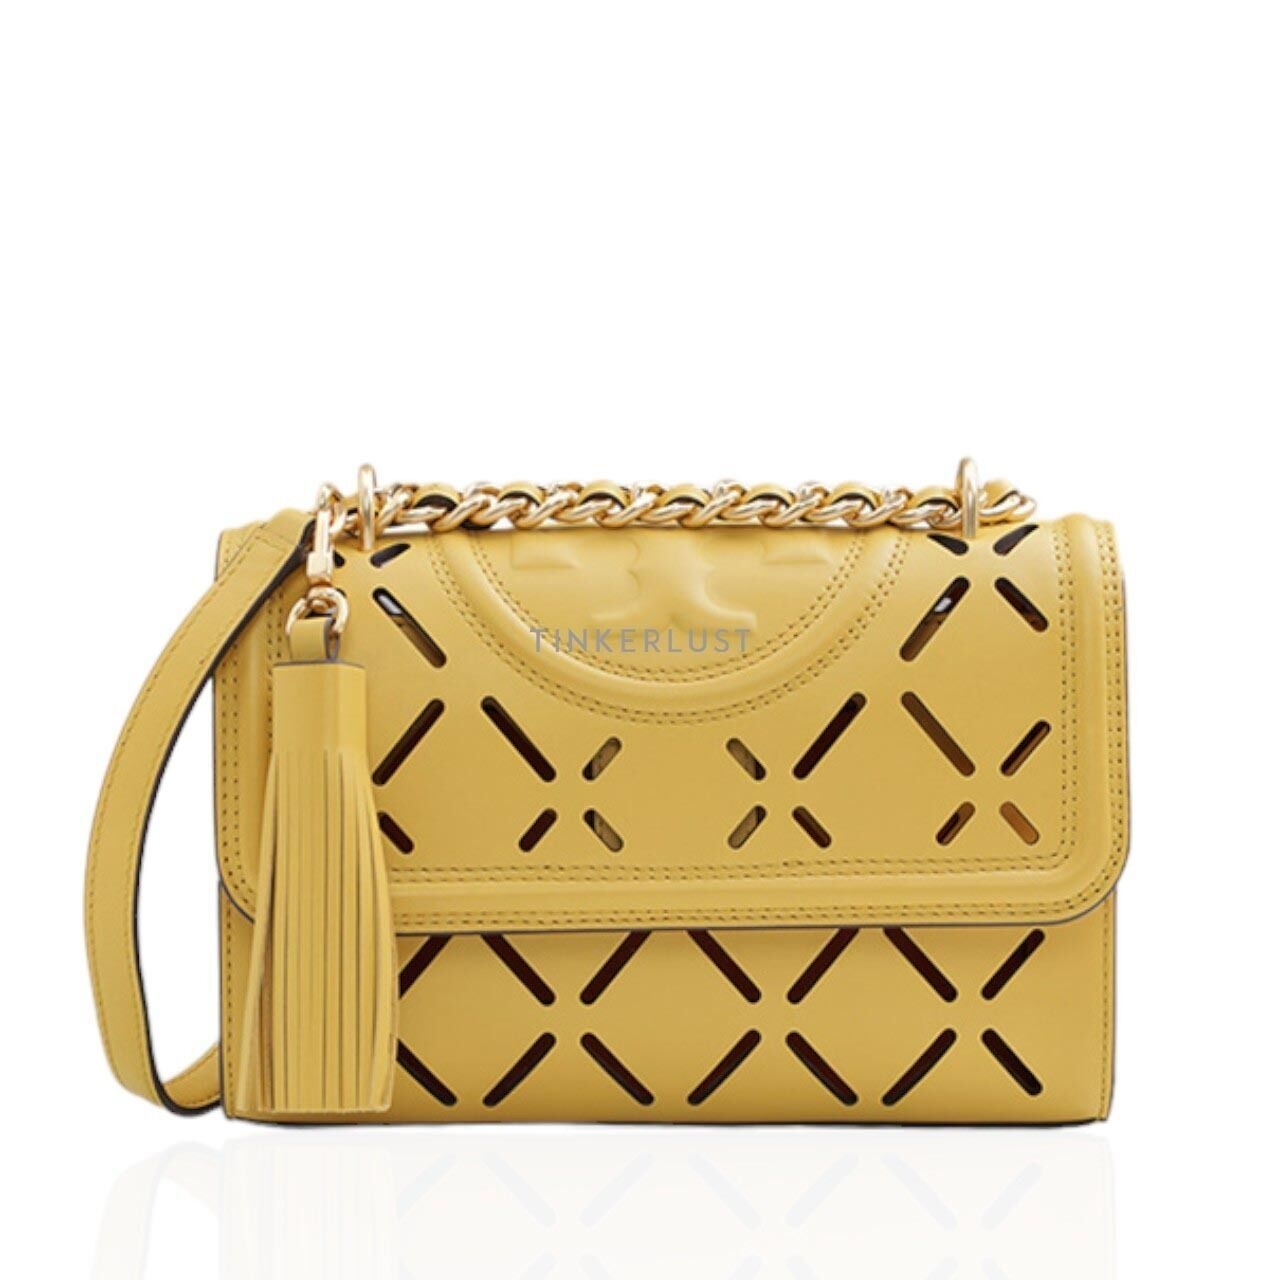 Tory Burch Small Fleming Diamond Perforated Convertible Shoulder Bag in Golden Sunset/Orange Citrine